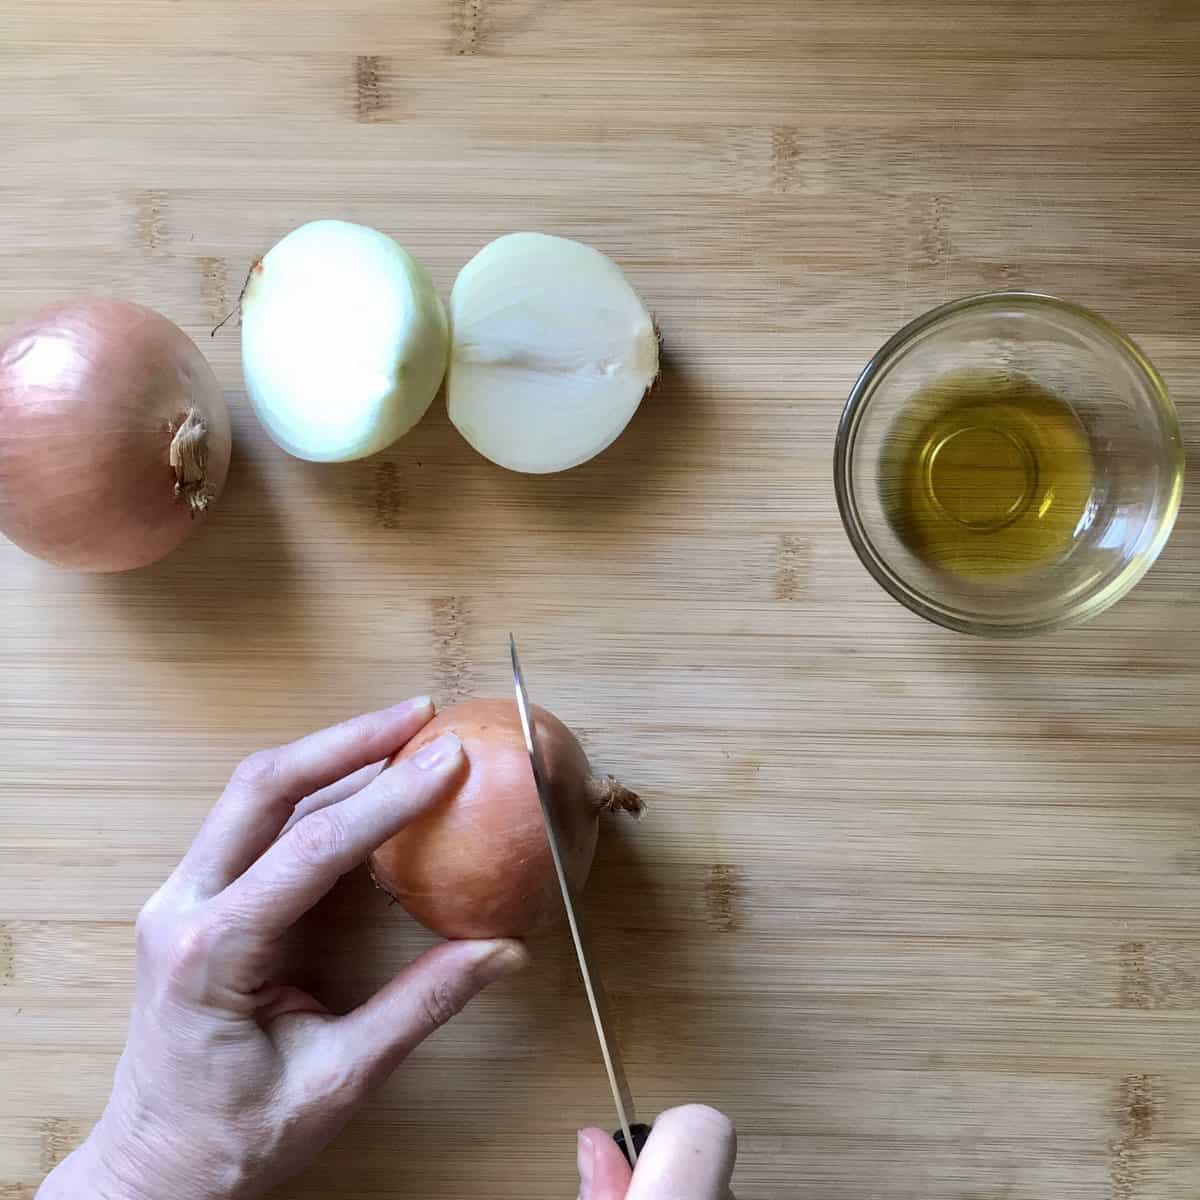 The stem is in the process of being cut off the onion.